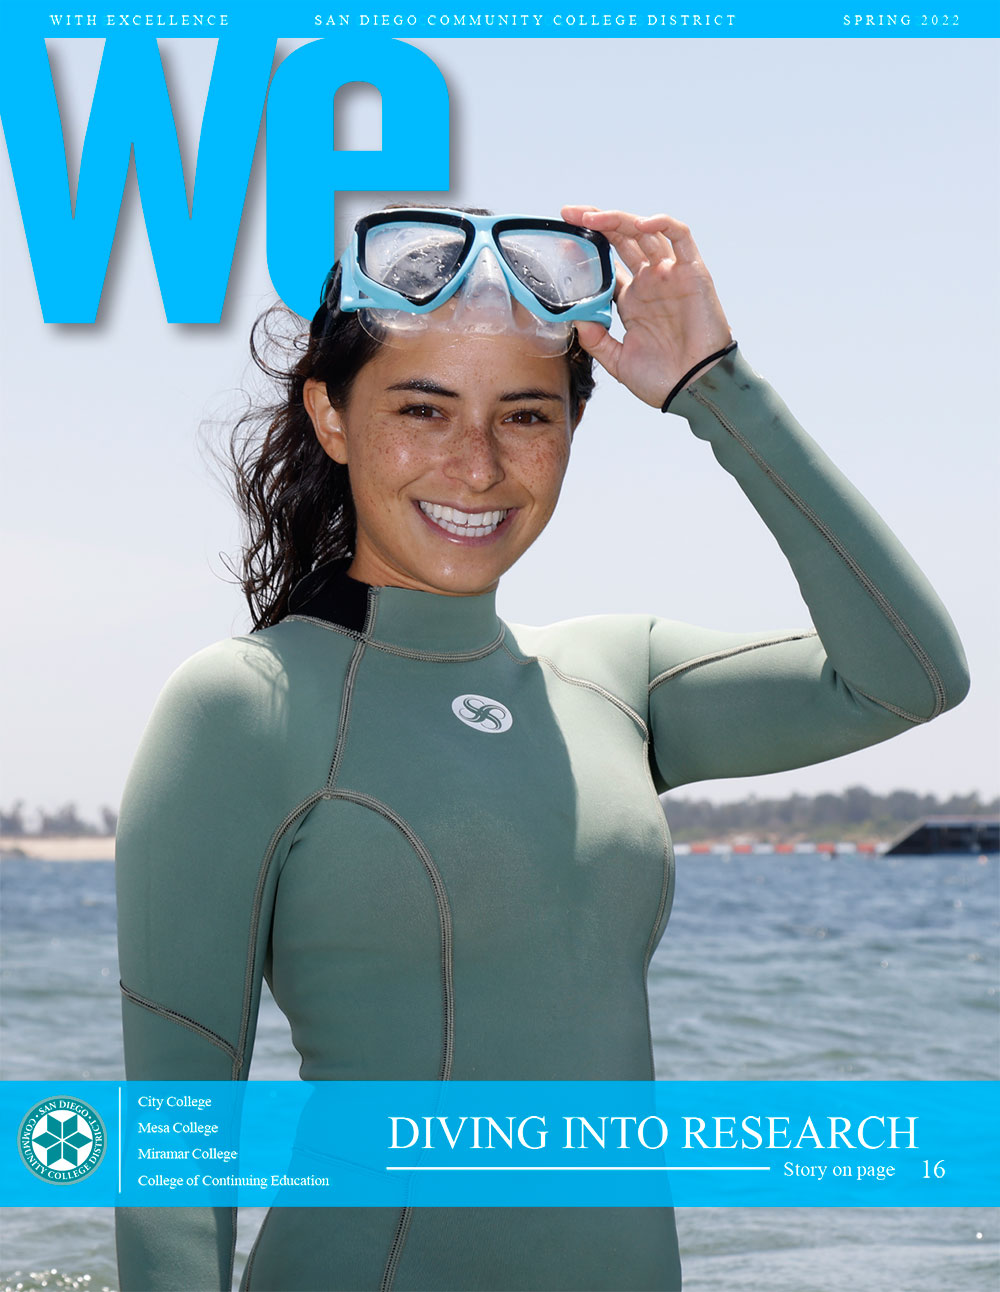 A student in a diving suit and goggles stands in front of water